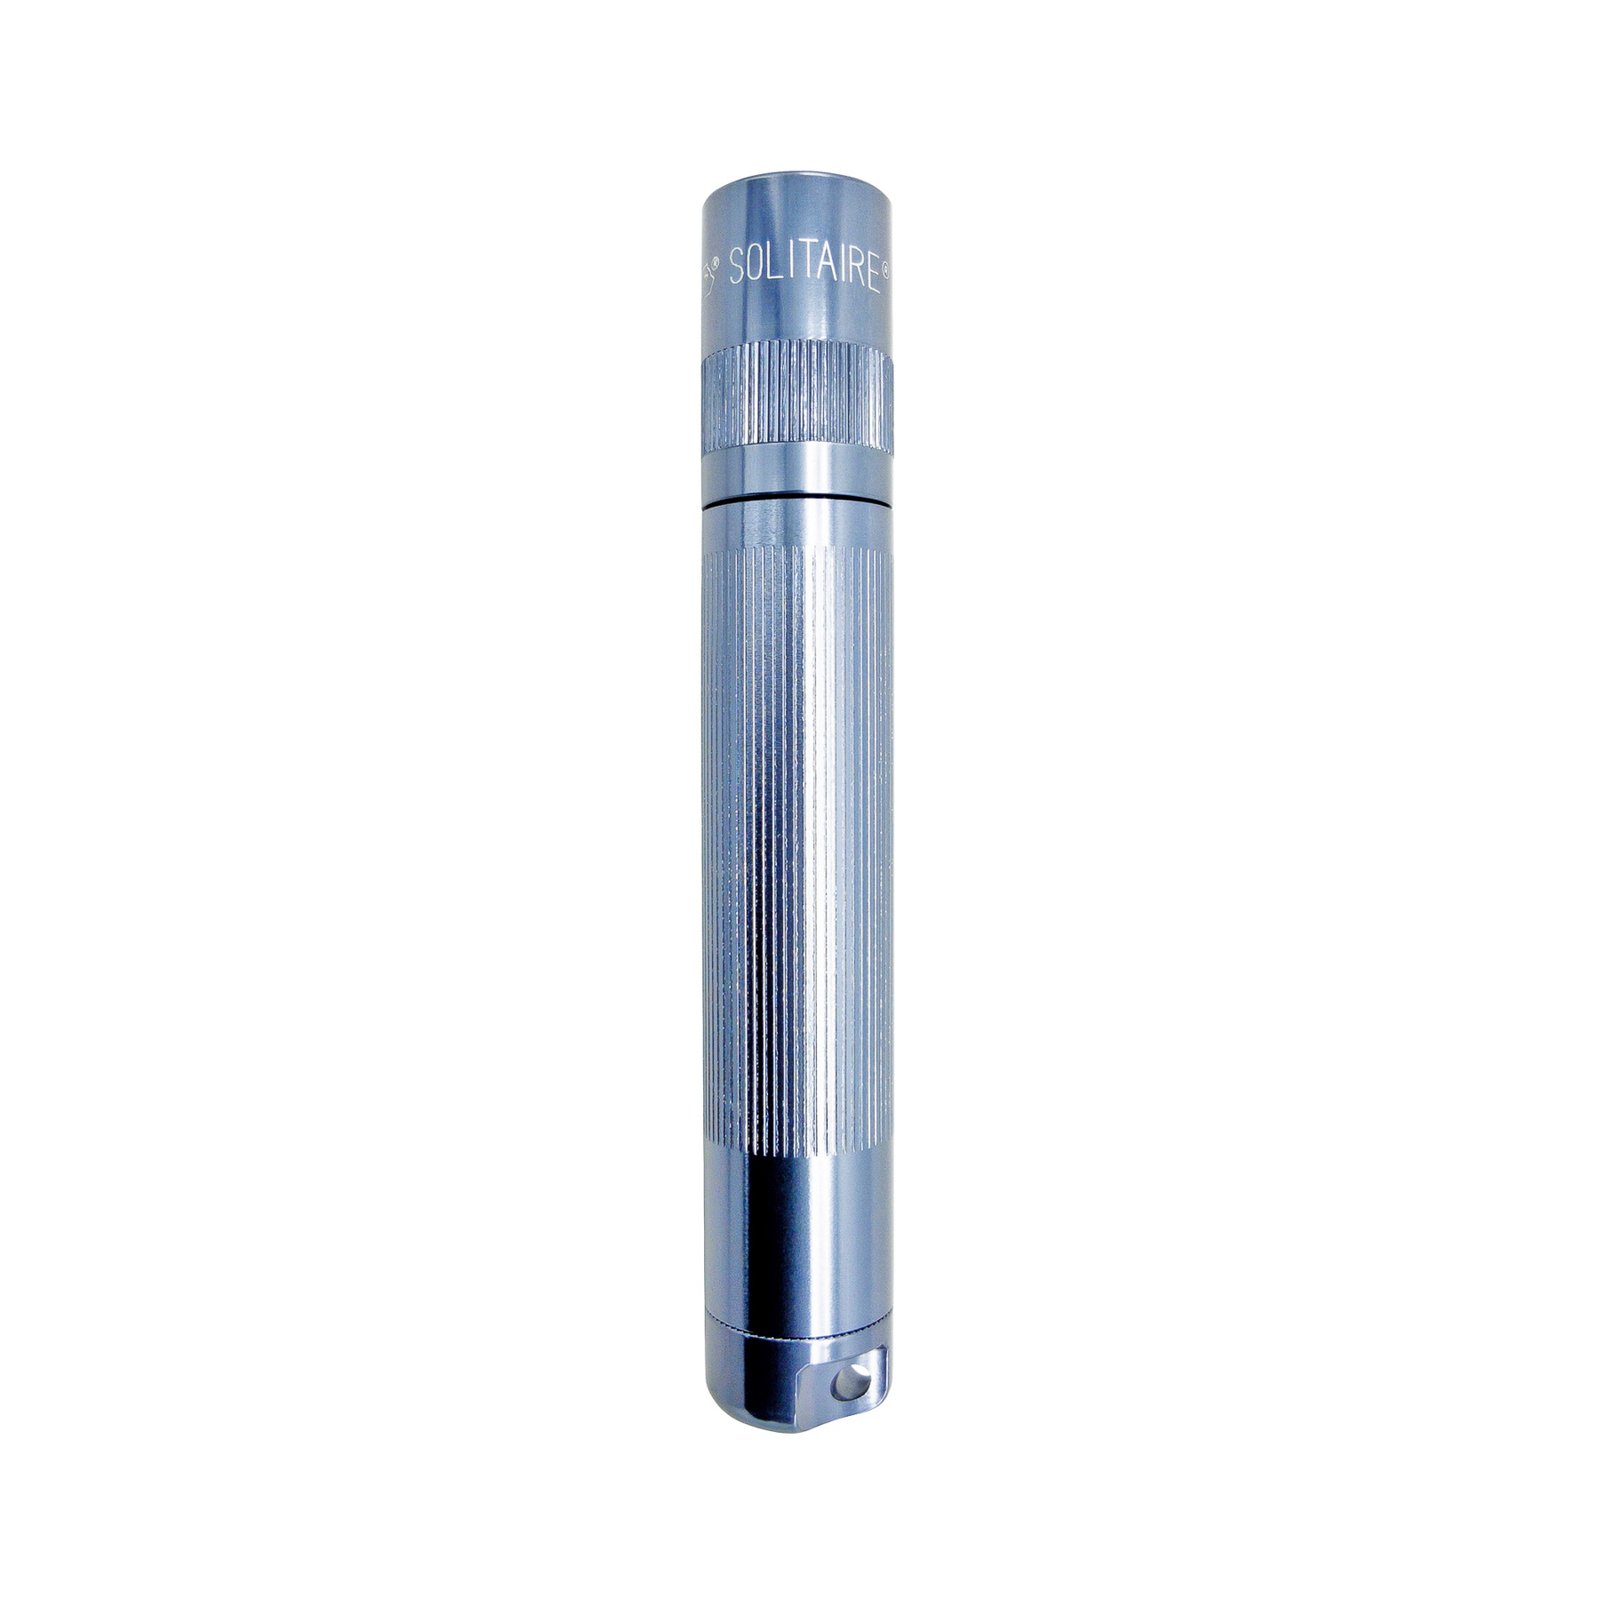 Torcia a LED Maglite Solitaire, 1 Cell AAA, Box, grigio